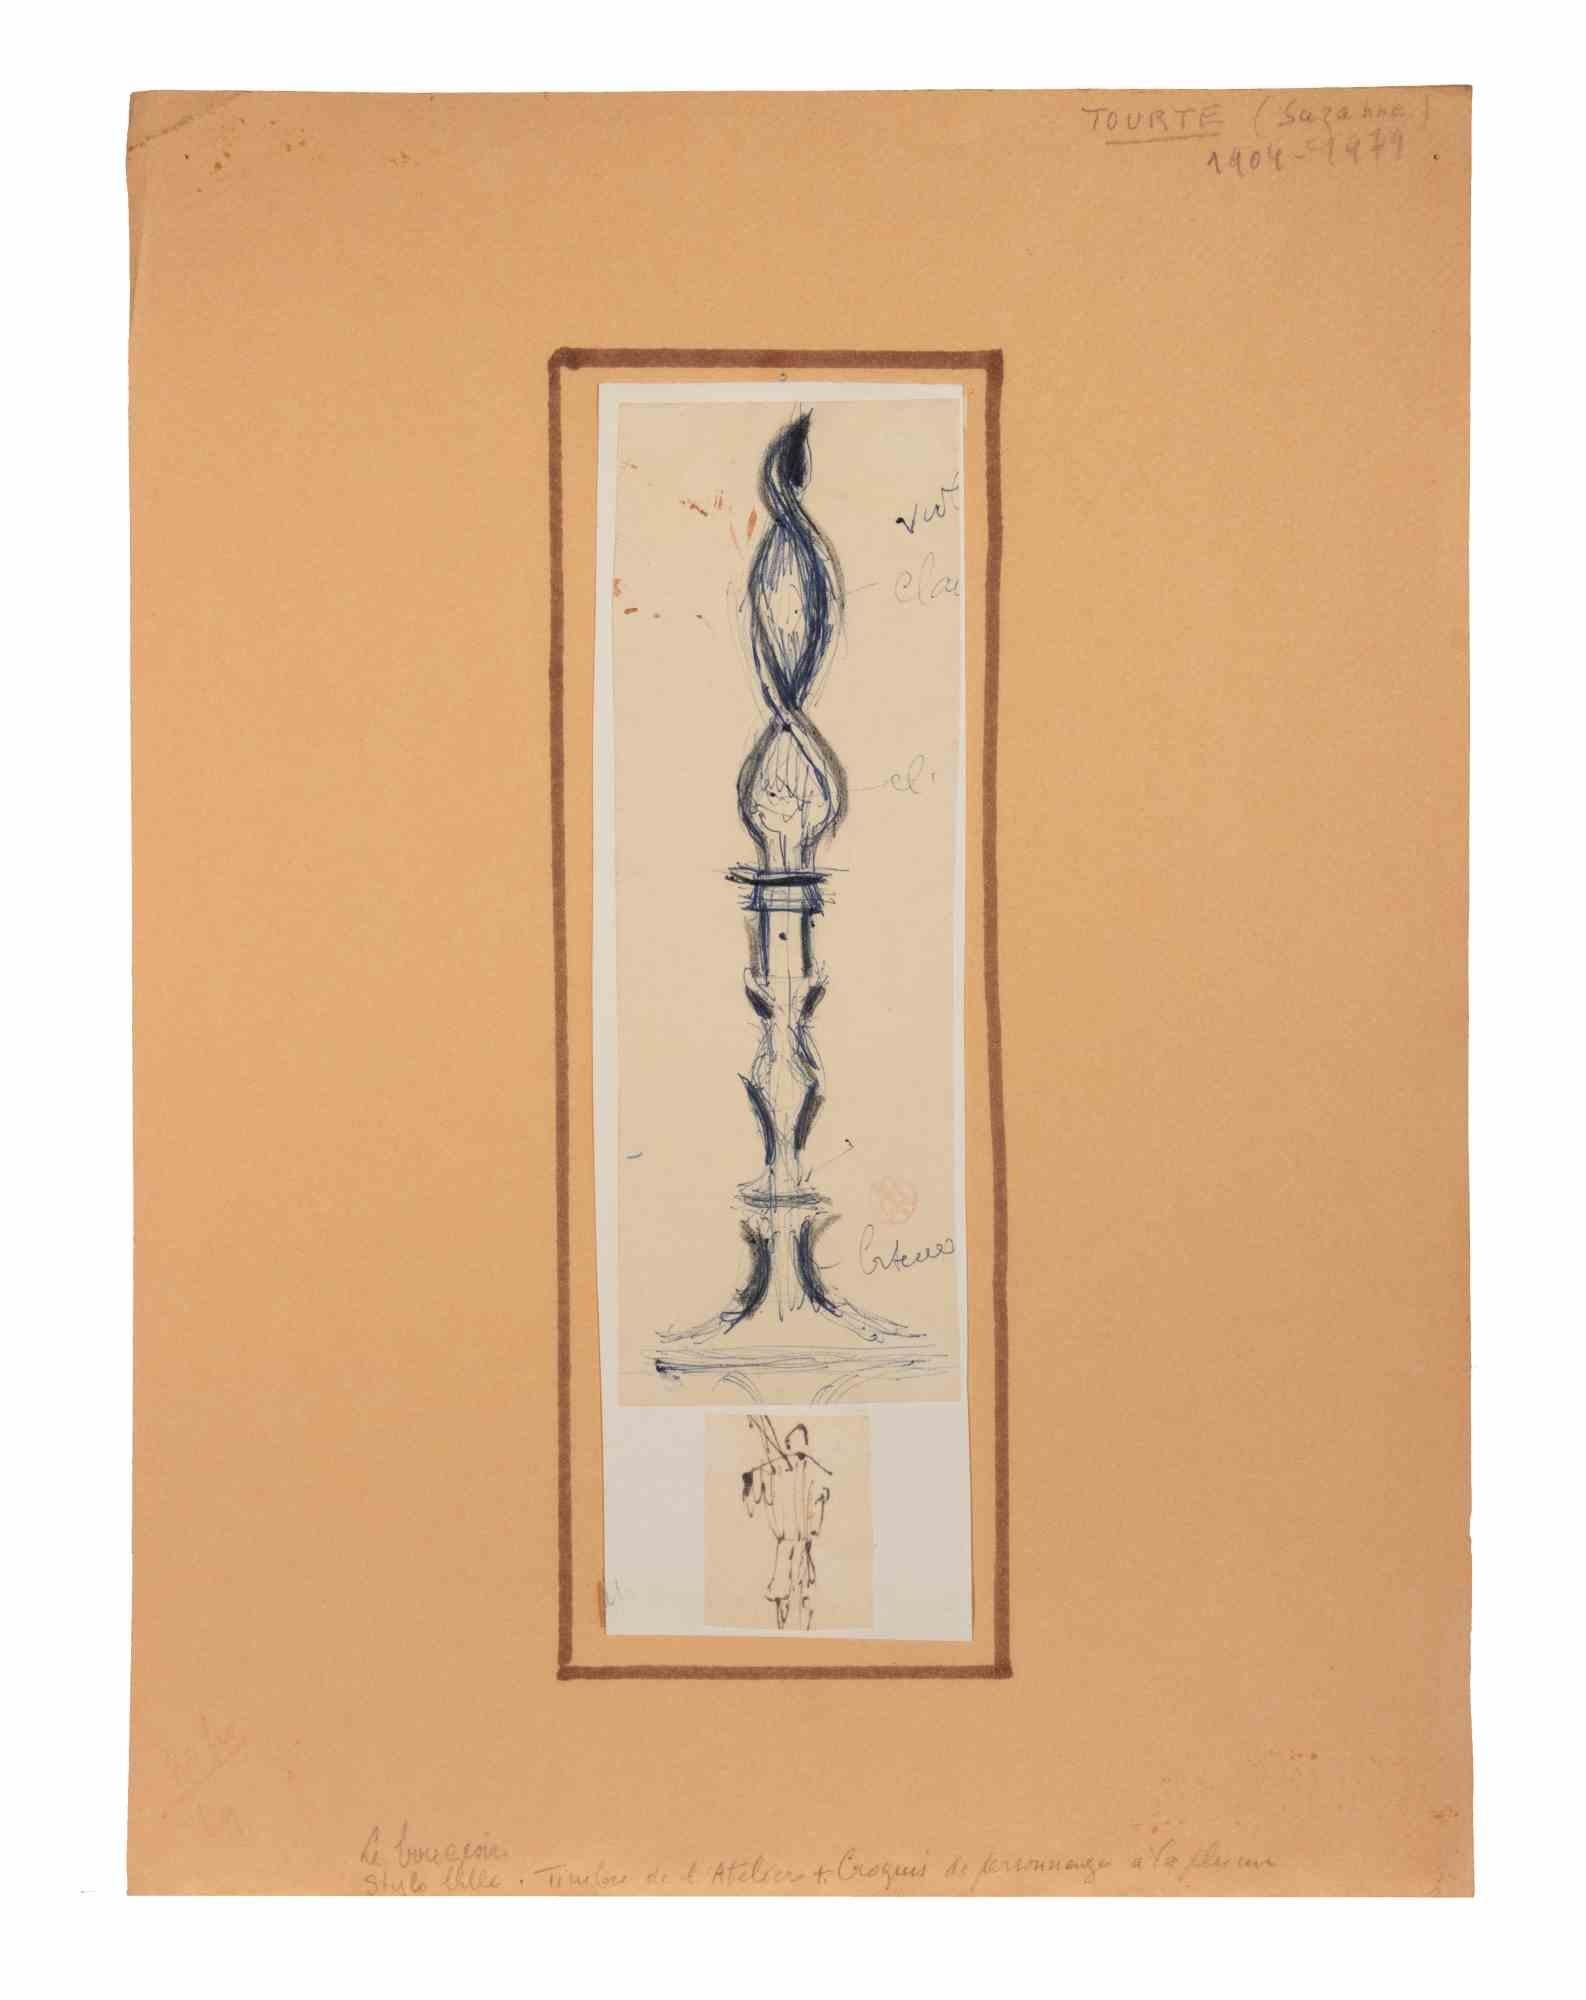 The Candle is a drawing realized in the mid-20th Century by Suzanne Tourte (1904-1979)

Two drawings ( The Candle and a Man) in Ink, pencil, and charcoal on paper.

Including a Passepartout

Good condition.